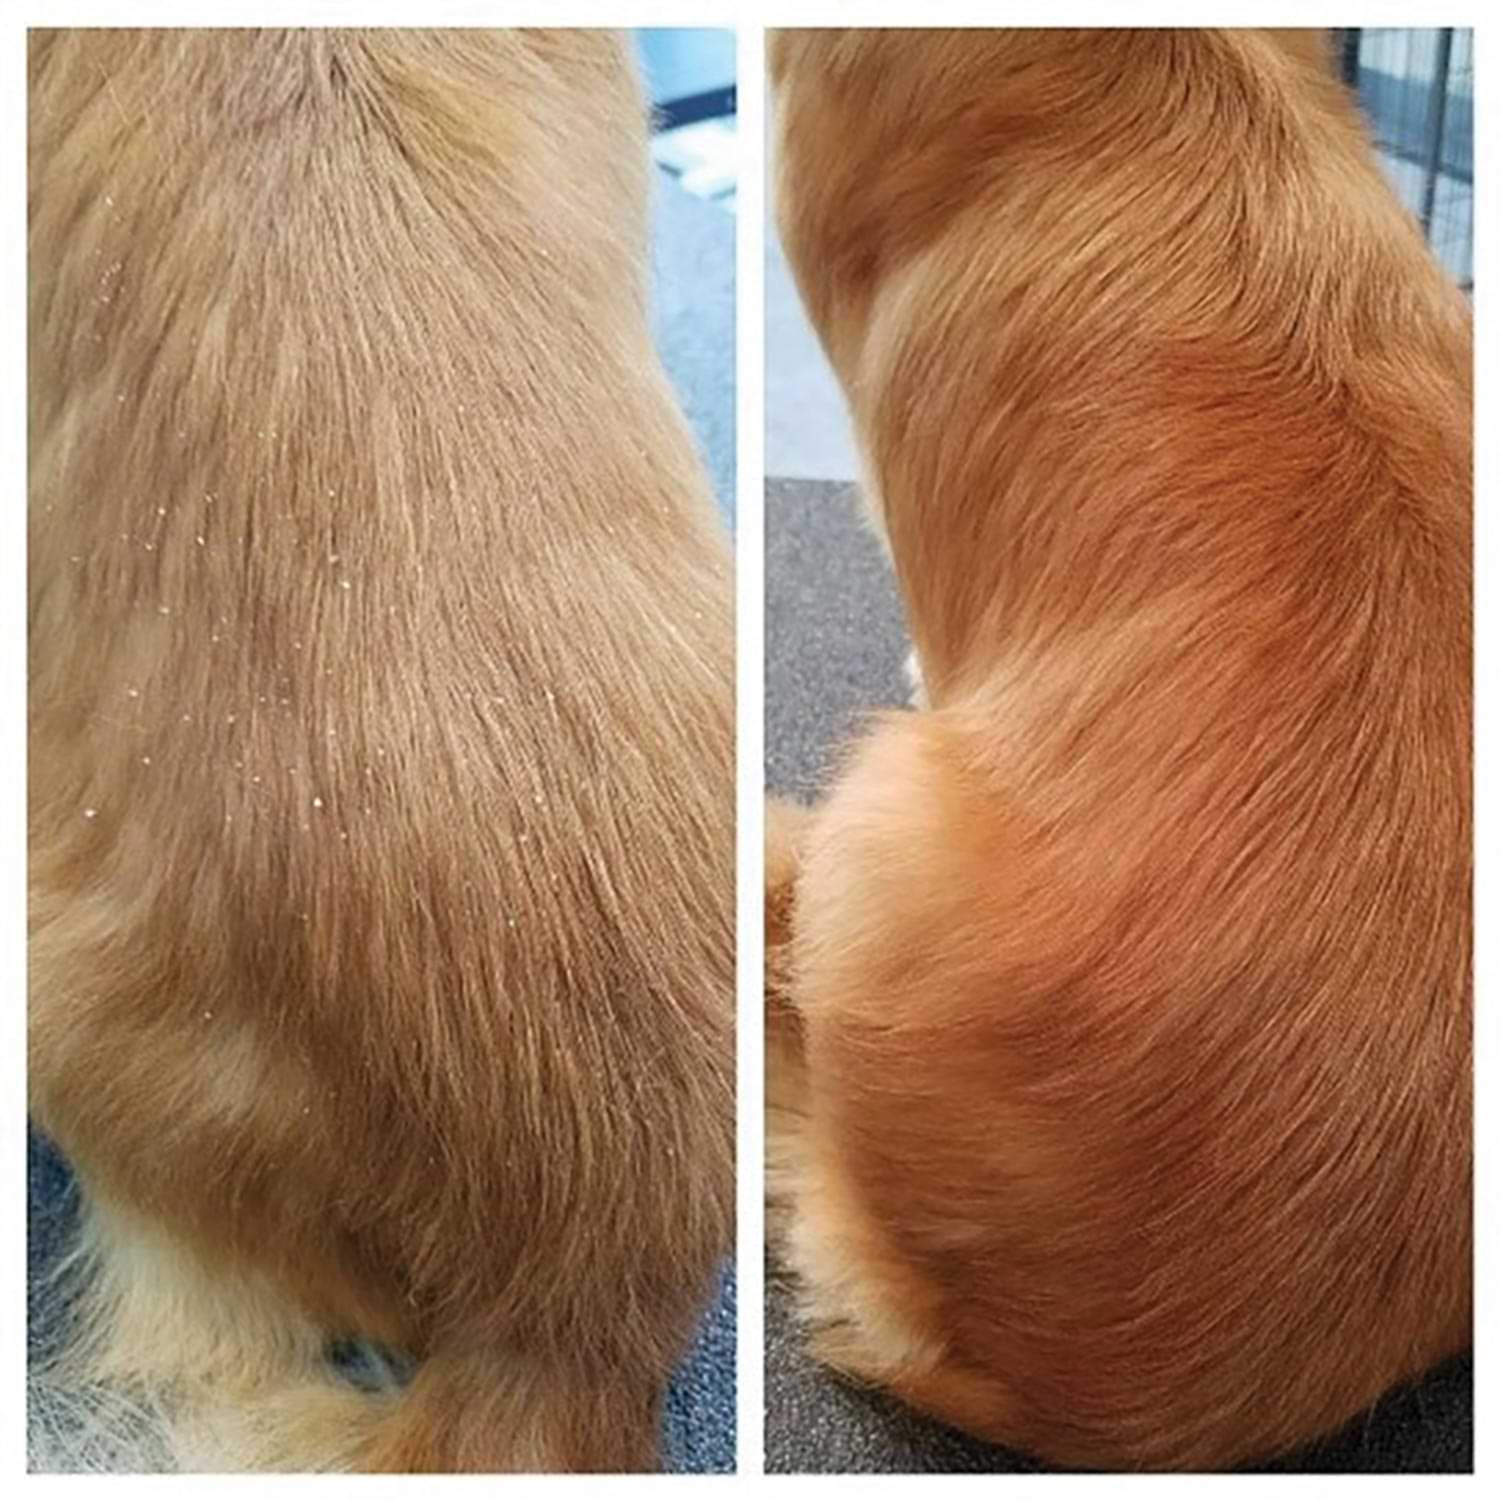 close view of the back of two Golden Retrievers, one suffering from ichthyosis and one not, for comparison